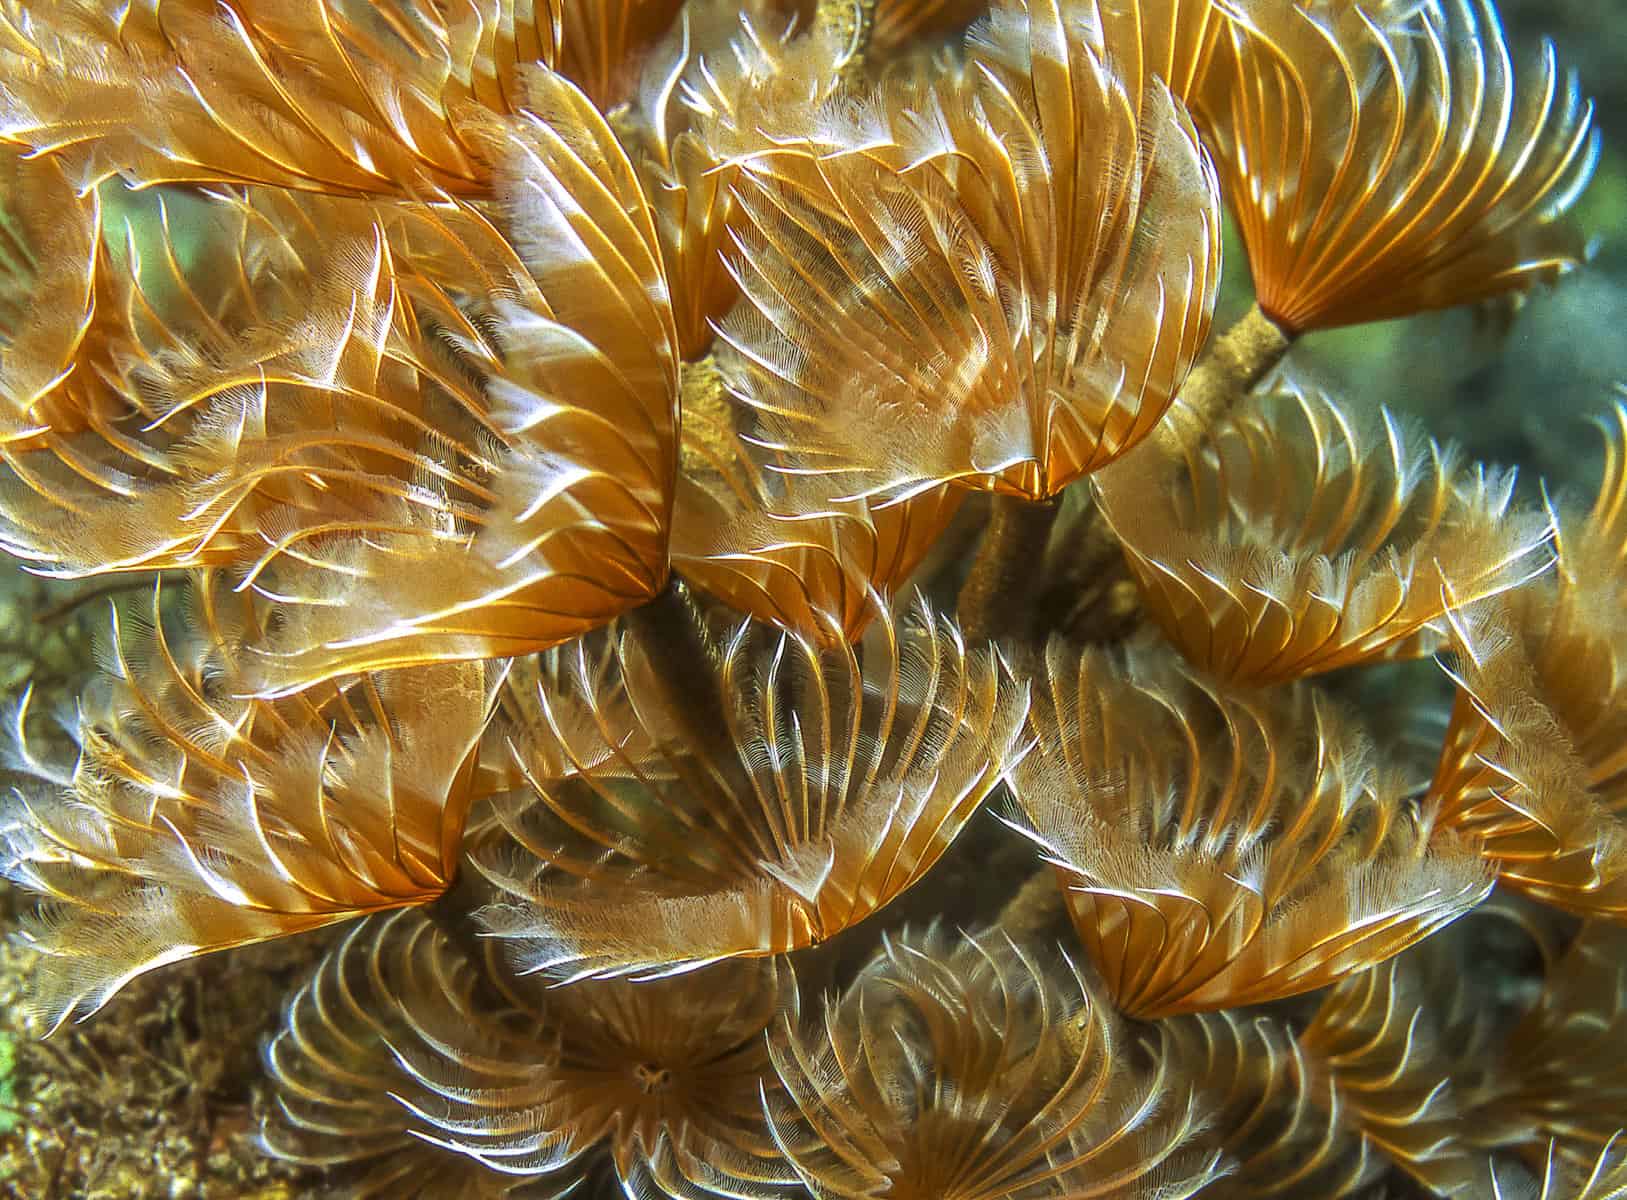 Sabellid Feather Duster Worms